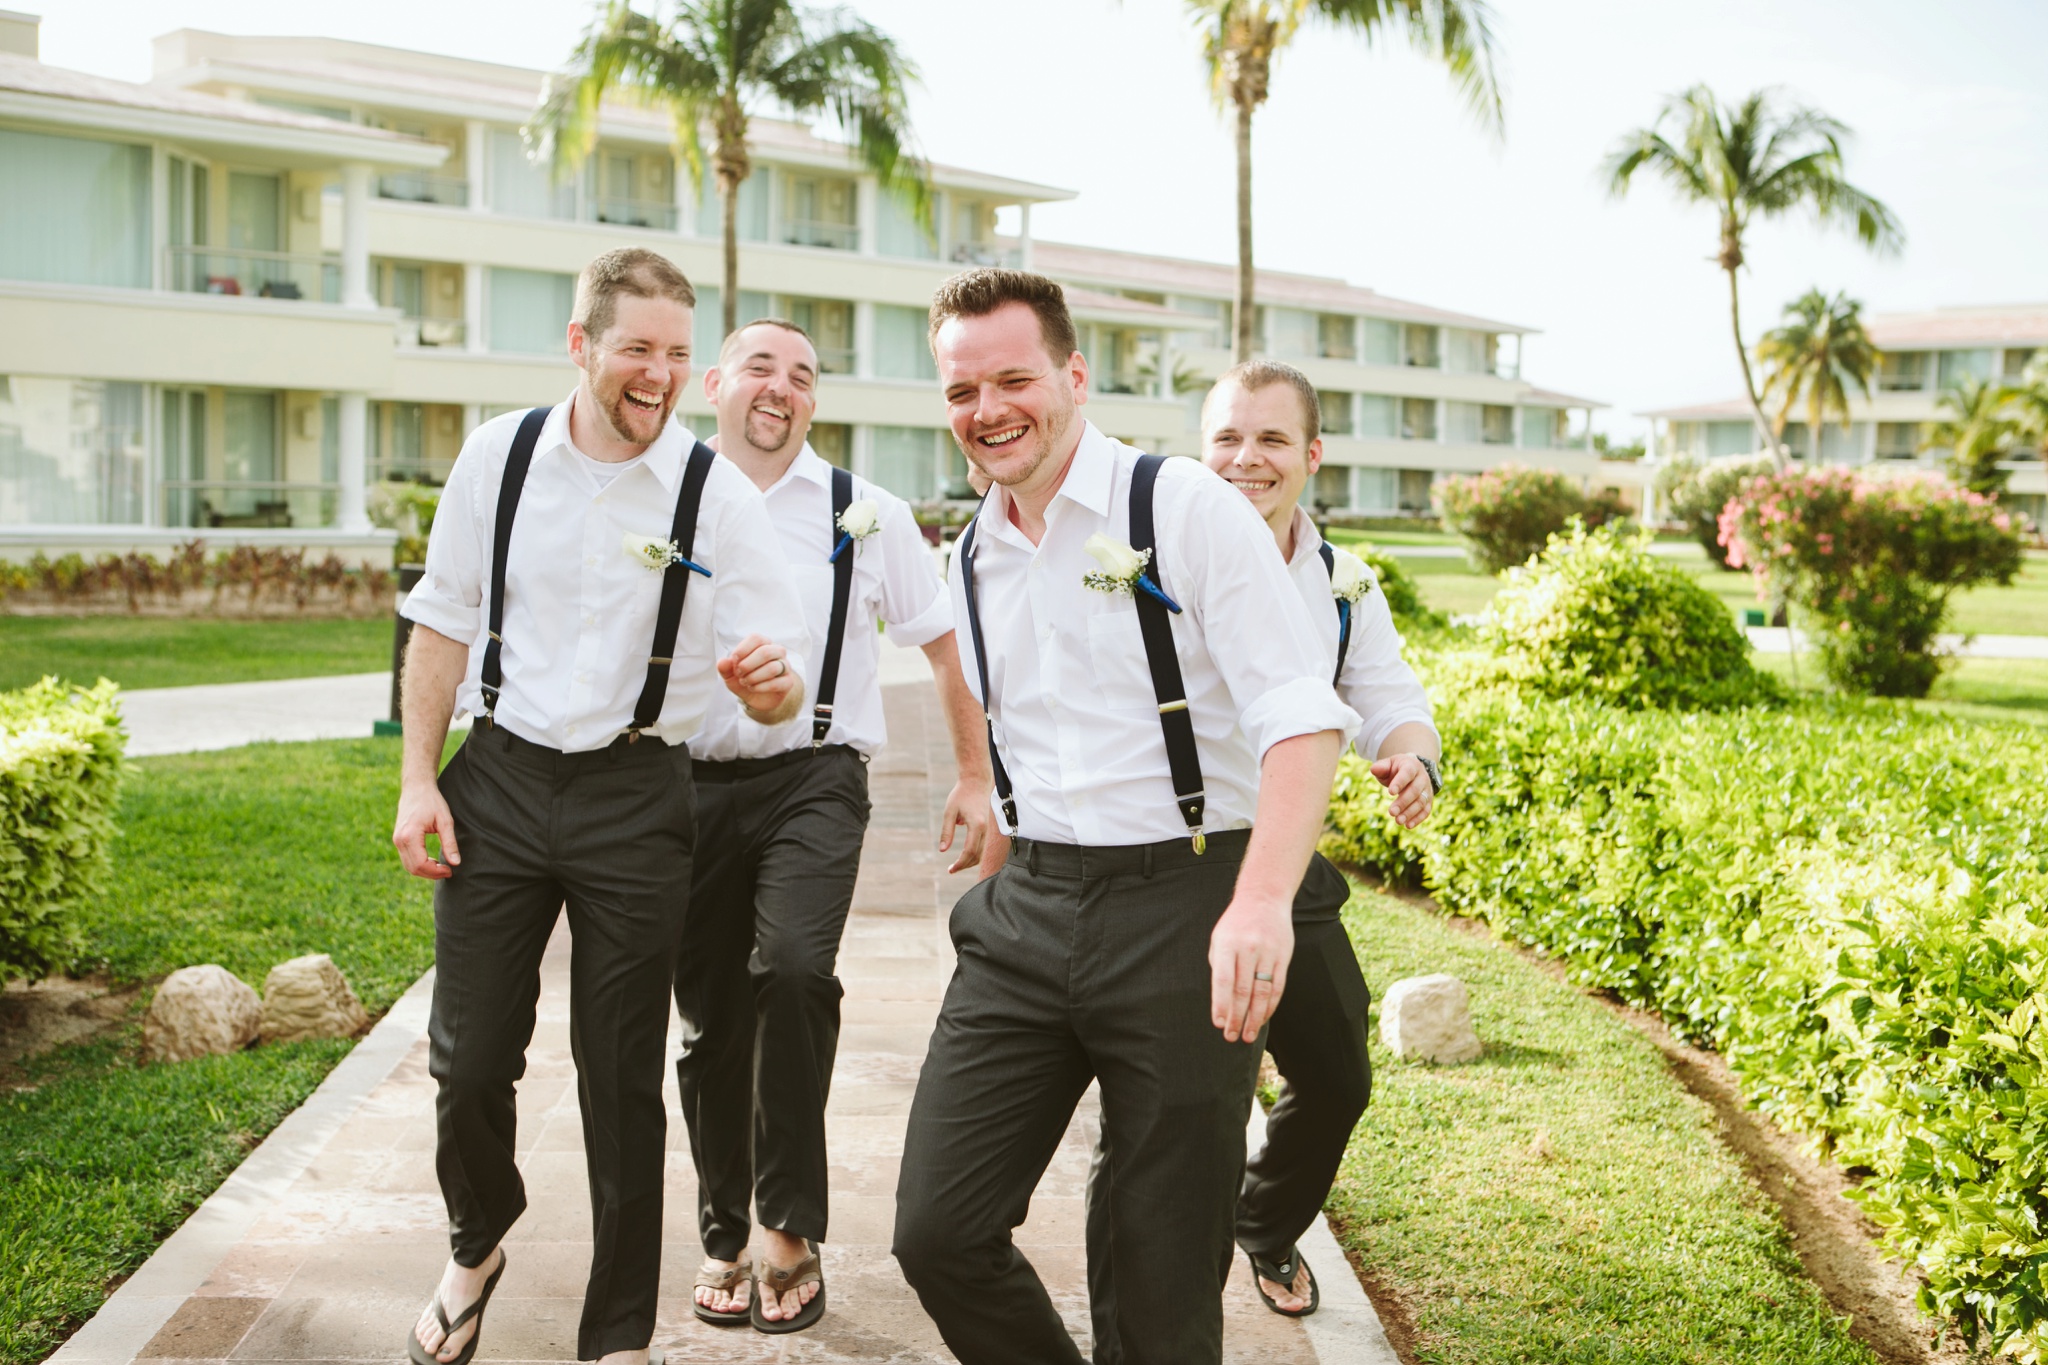 Moon Palace Resort Cancun Mexico Wedding Photos Groom Laughing with Groomsmen